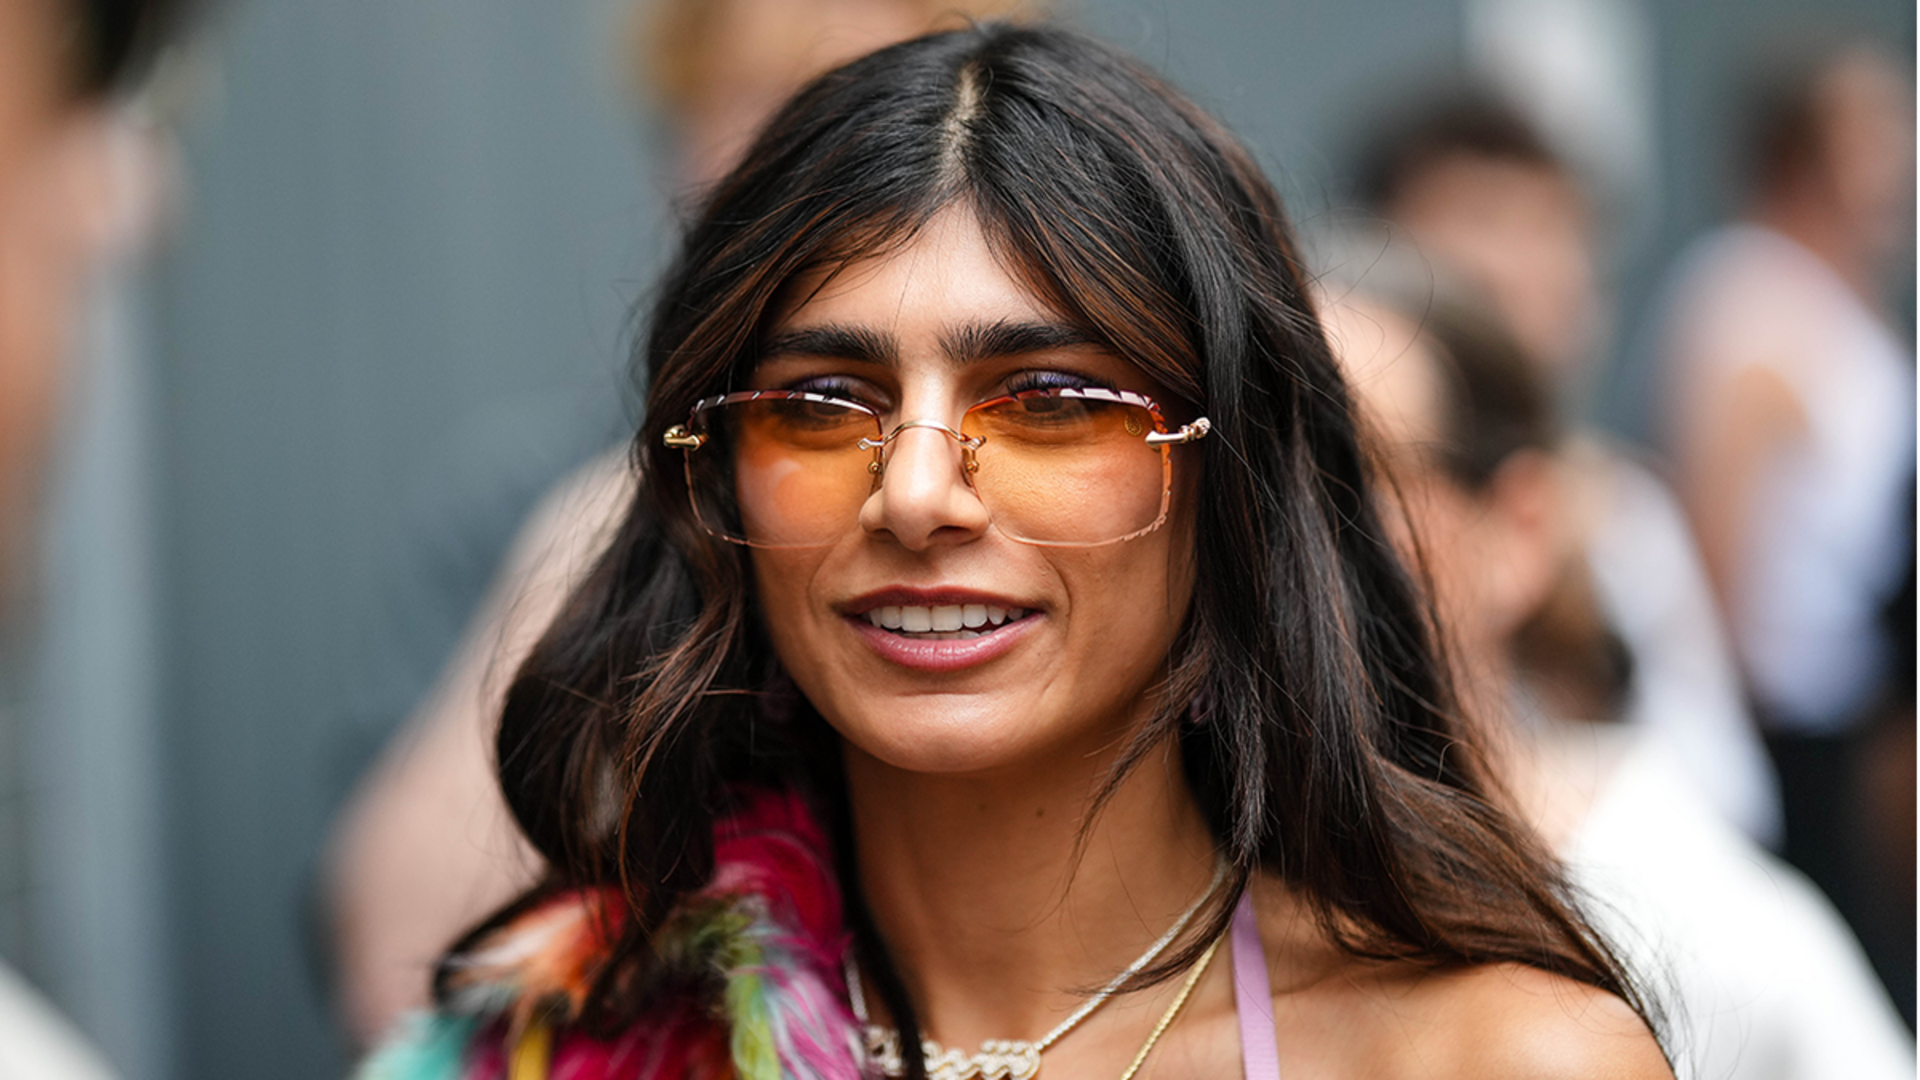 Mia Khalifa's Playboy podcast deal terminated over her pro-Hamas posts 